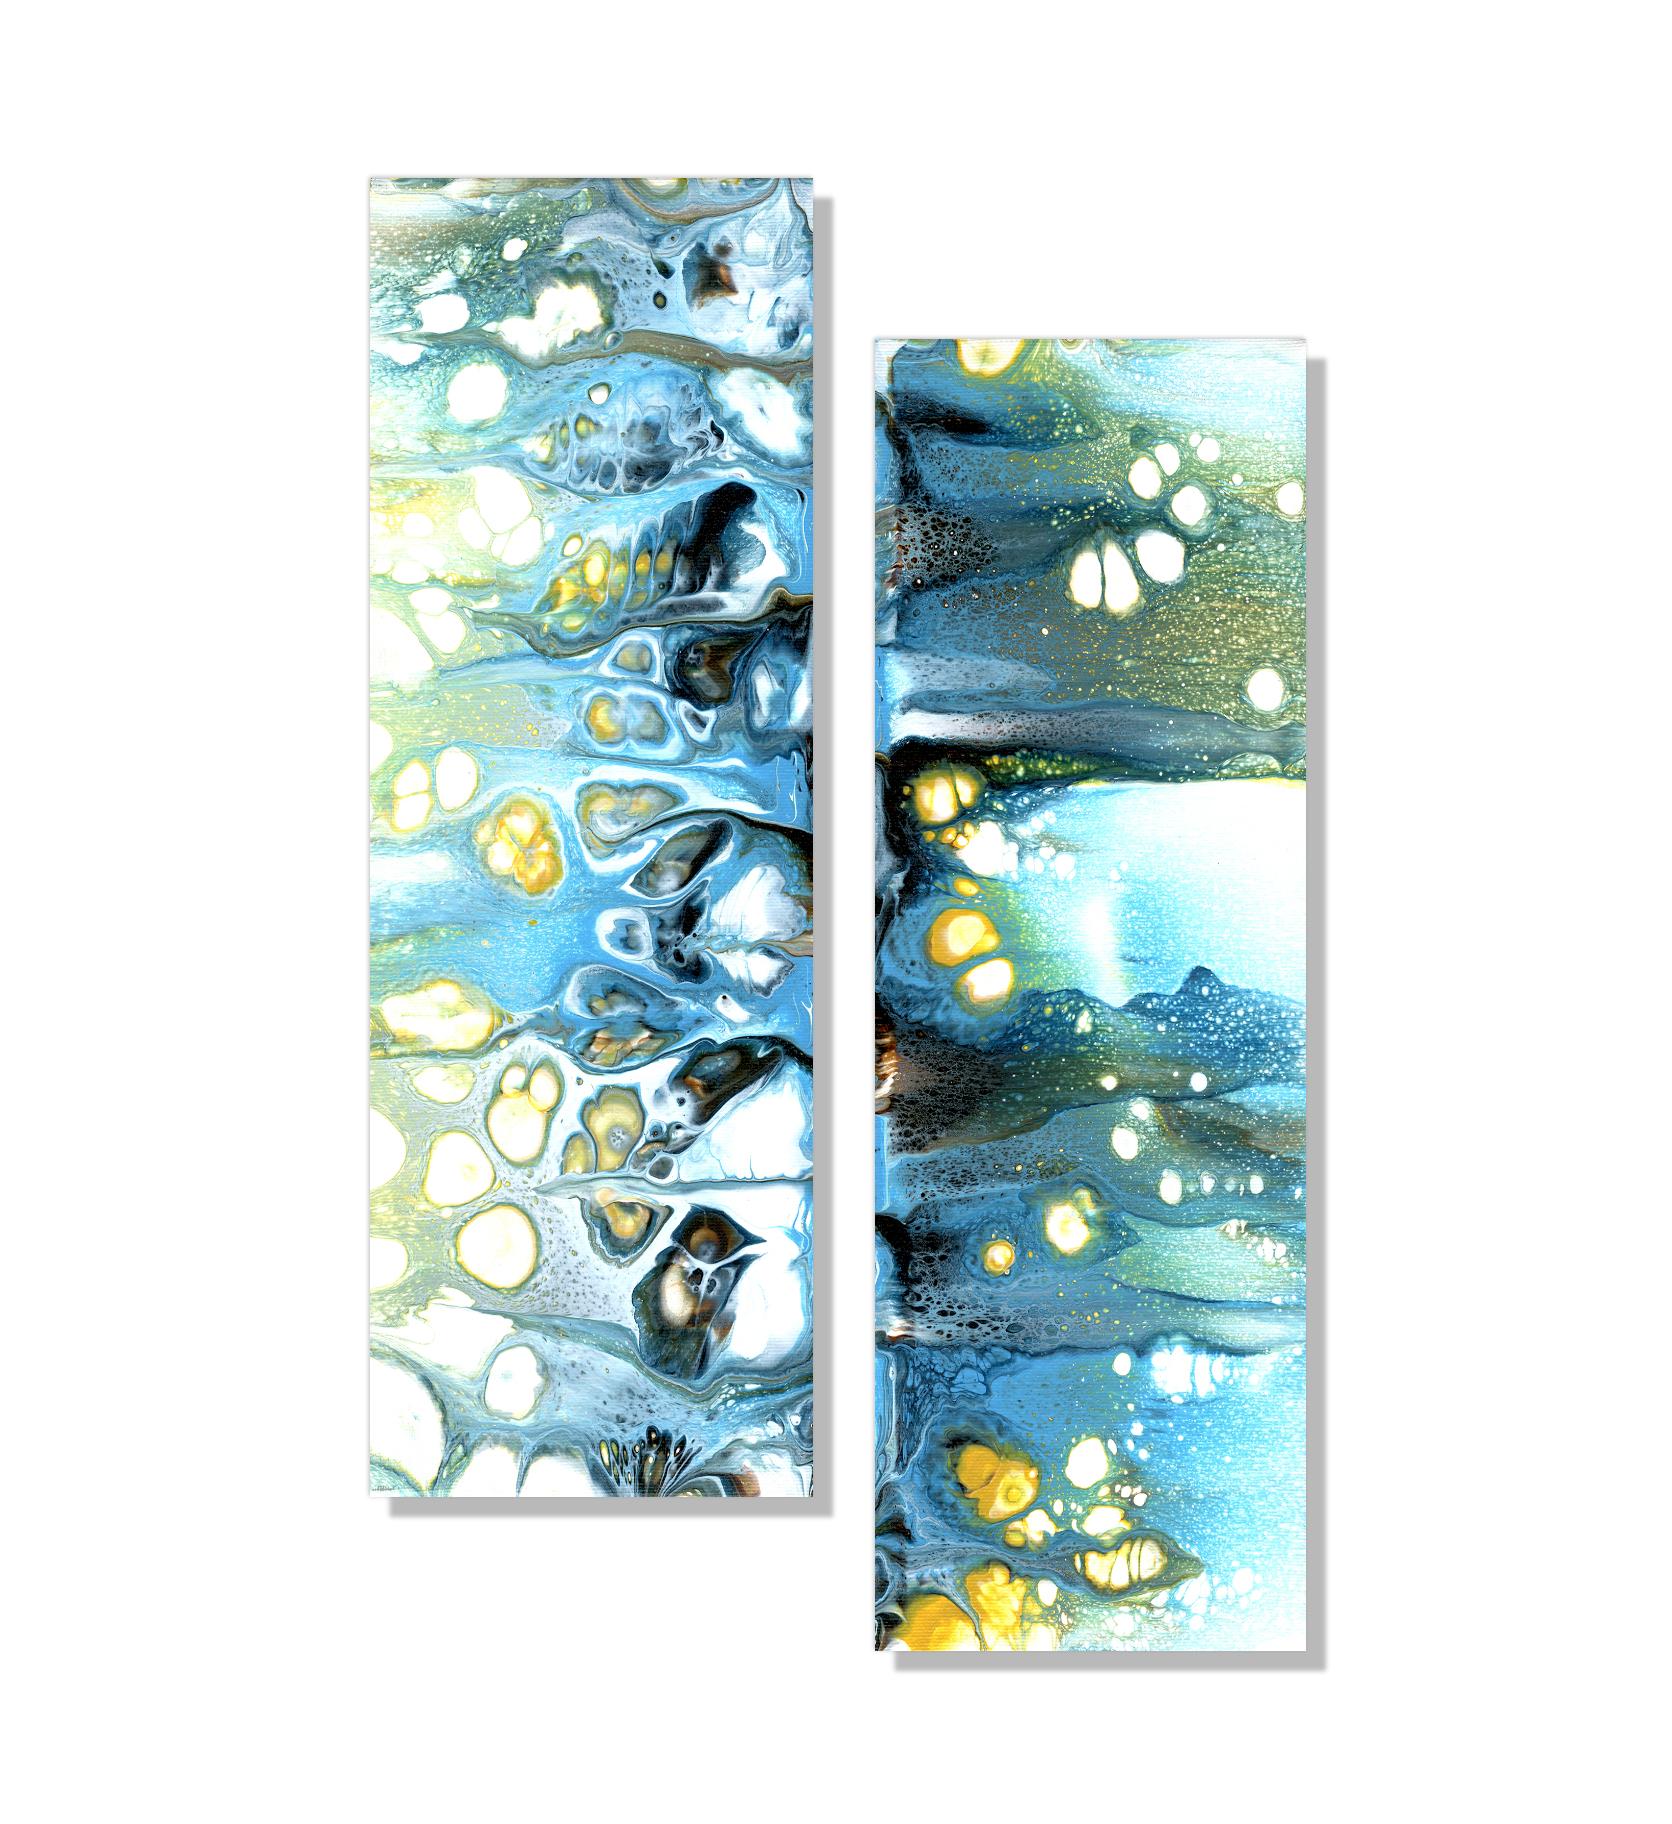 This contemporary abstract painting include blue, green, yellow, and white. Printed on a lightweight metal composite, your artwork arrives ready to hang. The automotive high-gloss clear coat offers both UV protection and high-end modern finish. This